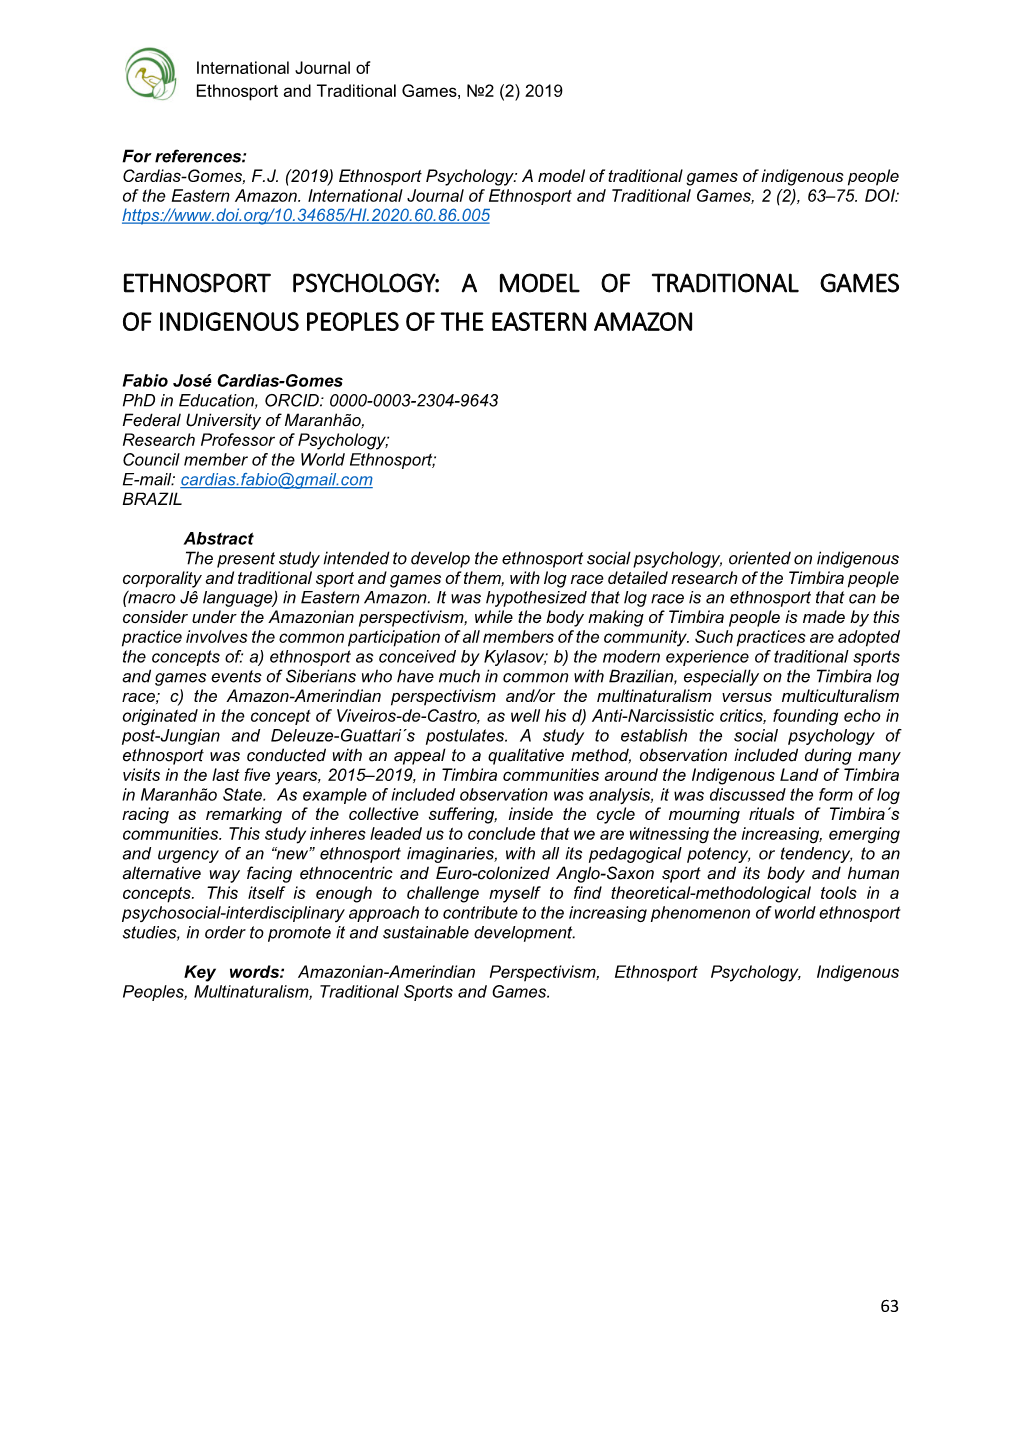 Ethnosport Psychology: a Model of Traditional Games of Indigenous People of the Eastern Amazon